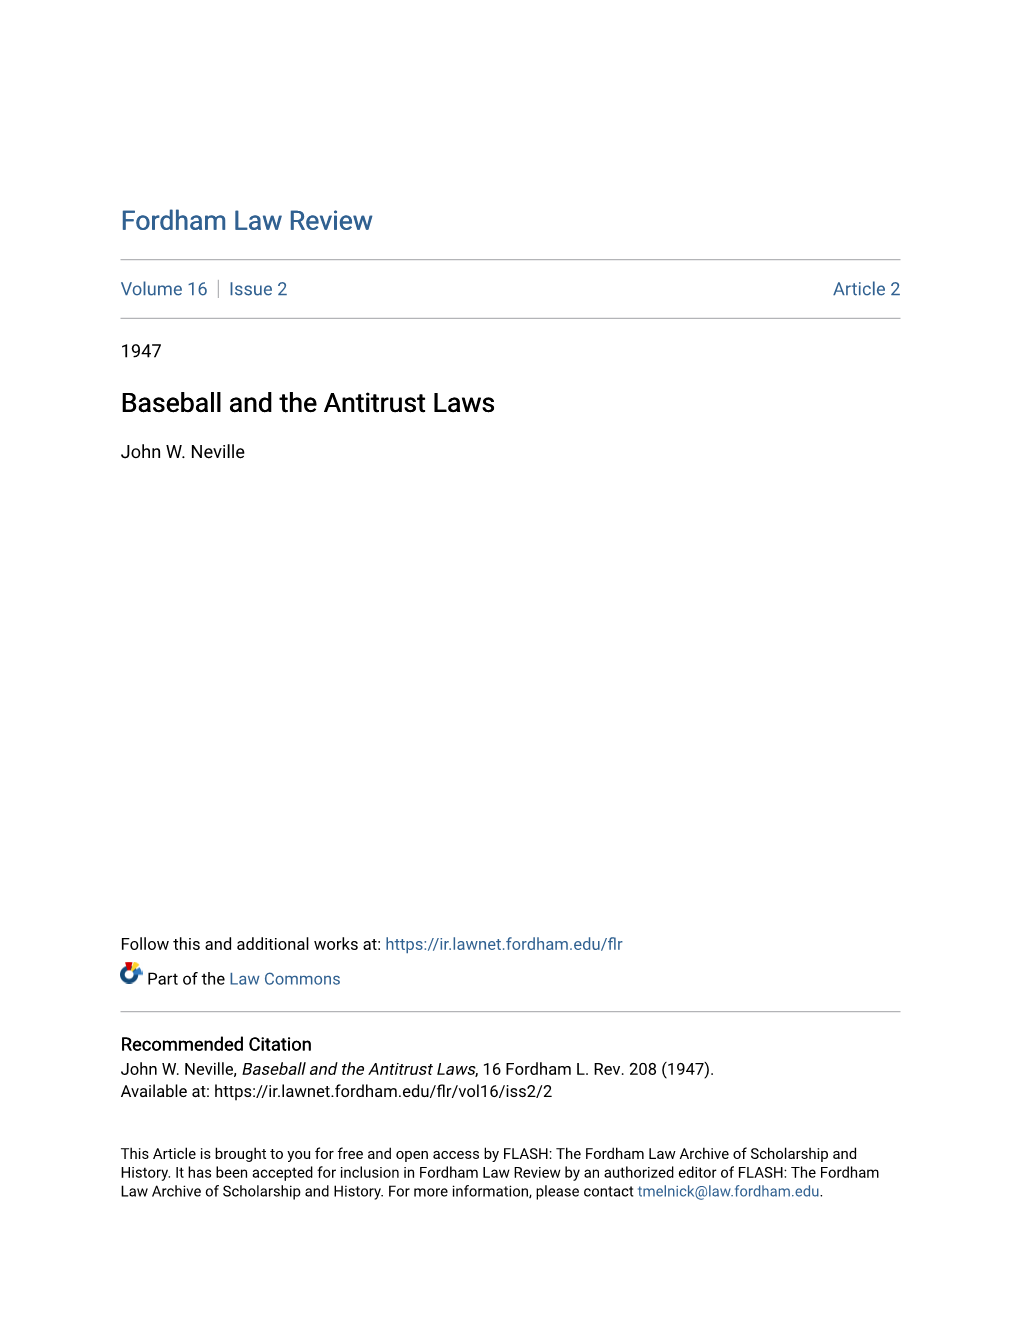 Baseball and the Antitrust Laws